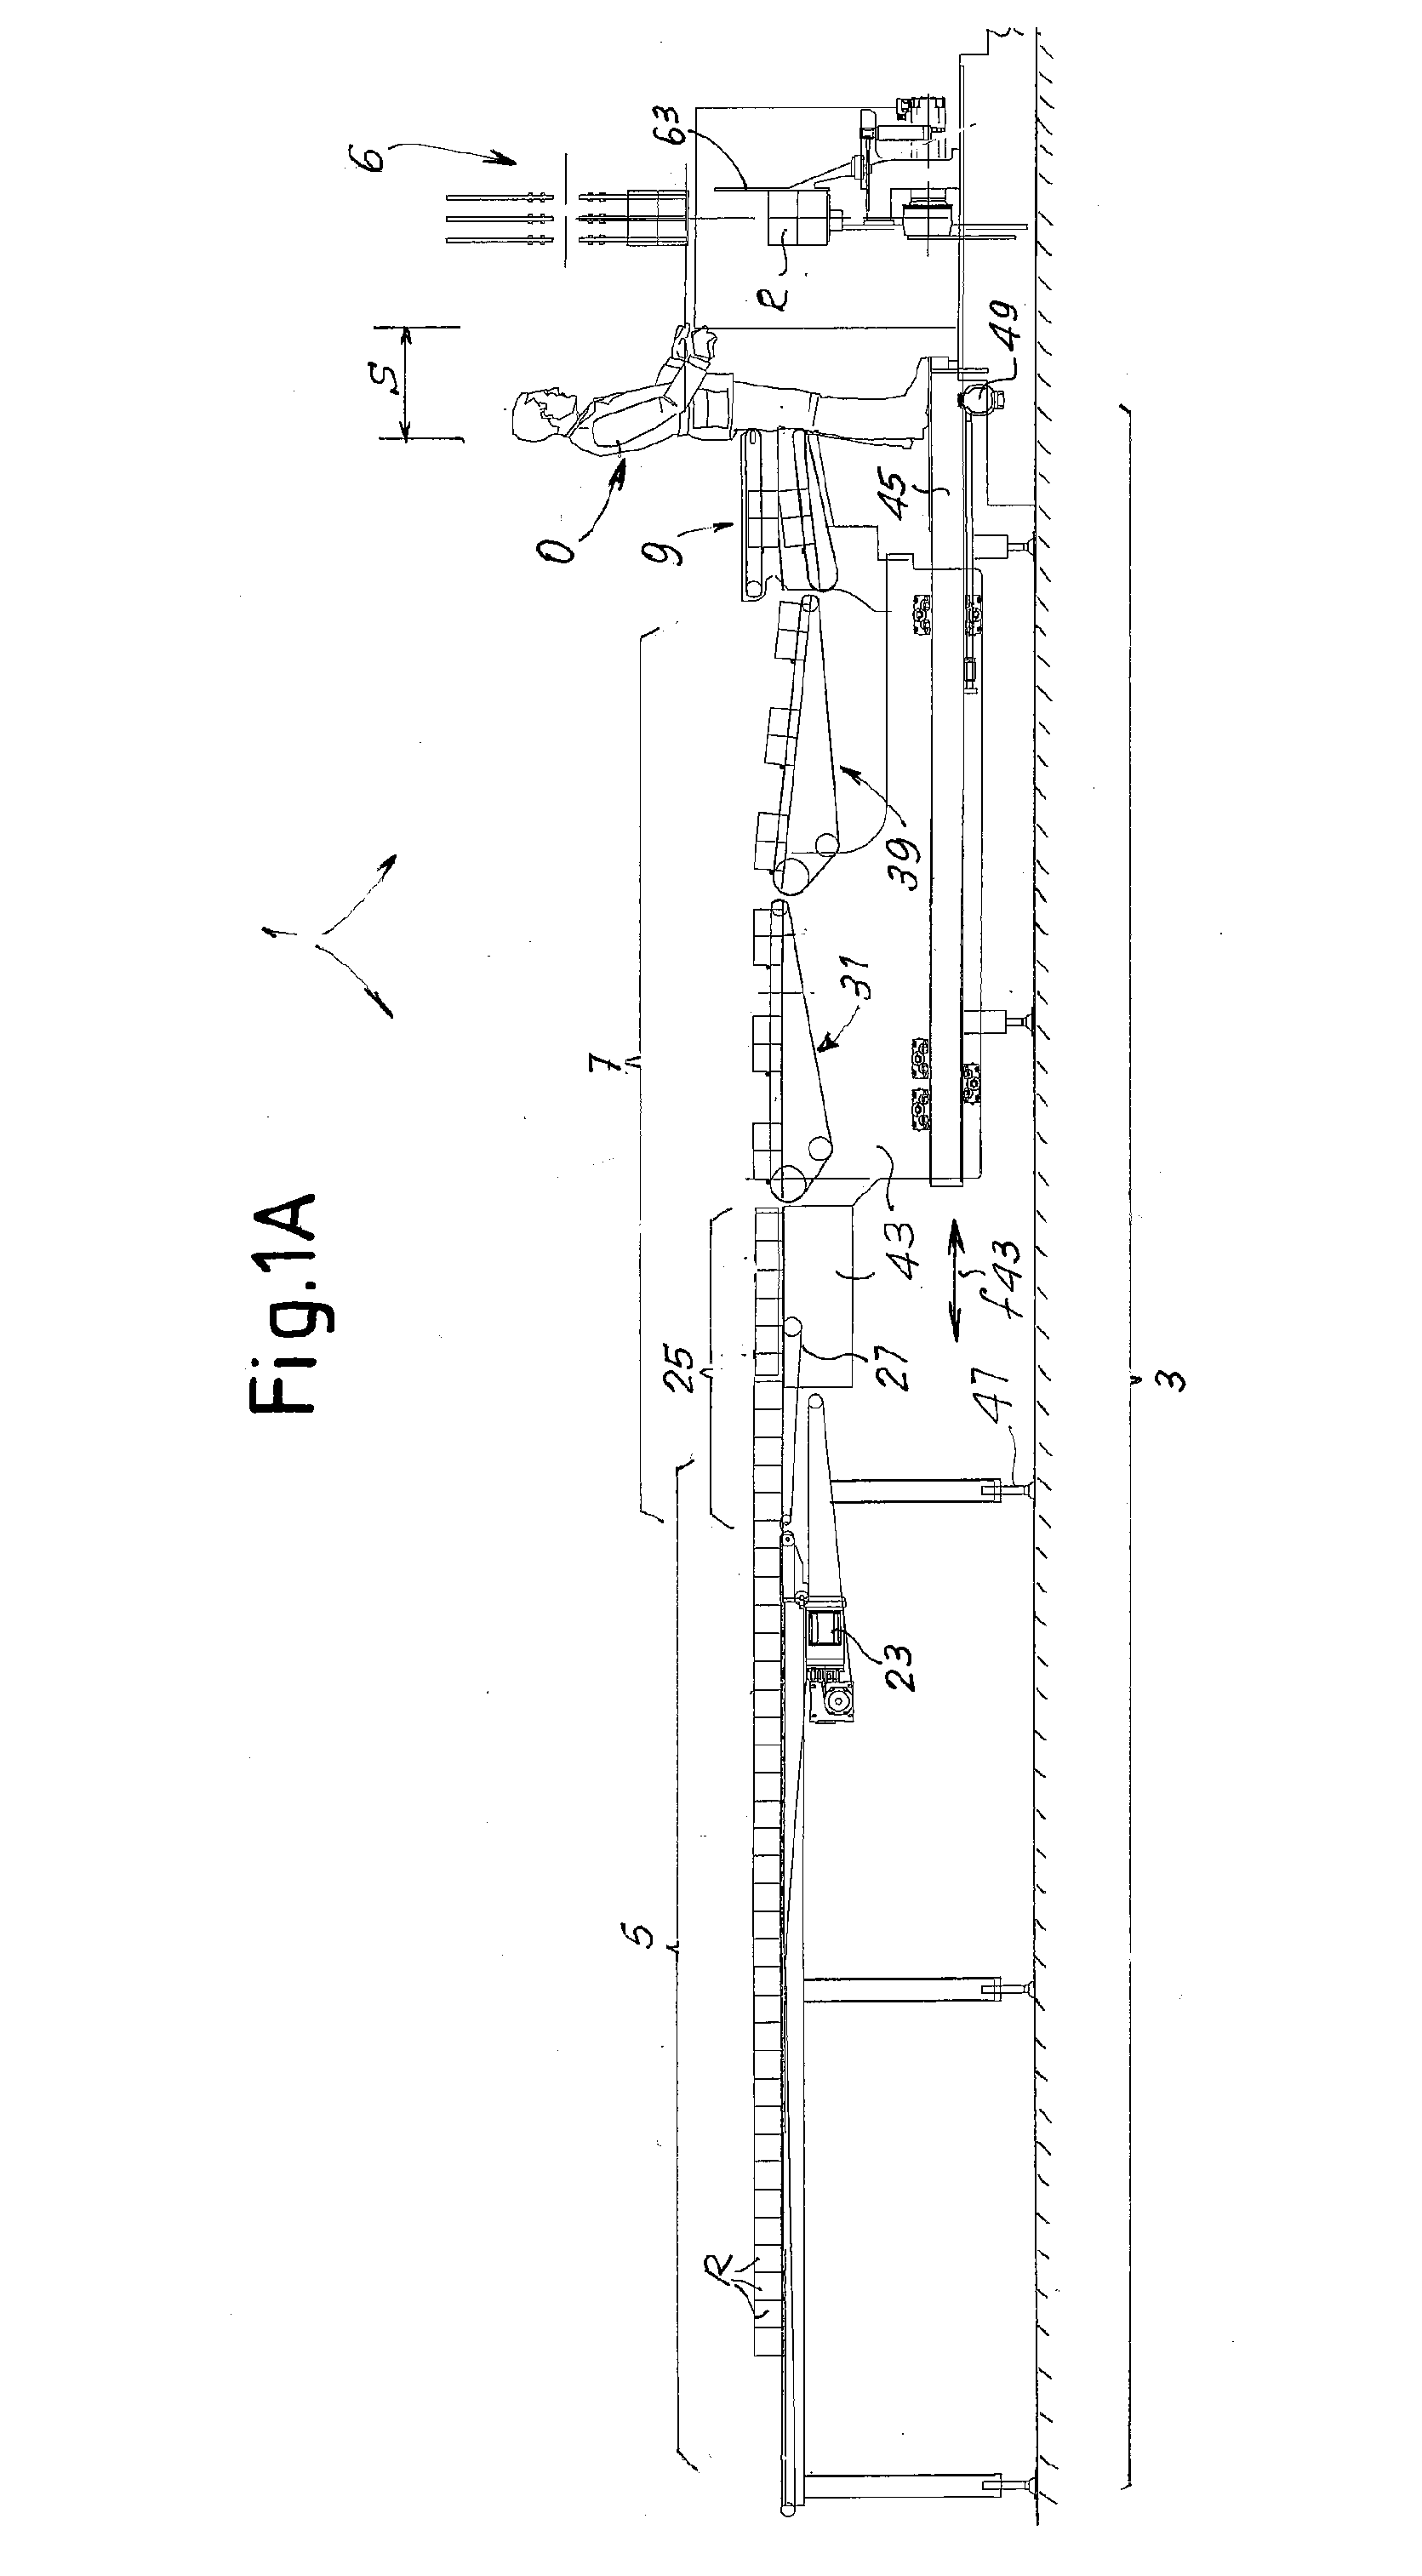 Machine for packaging products arranged in ordered groups